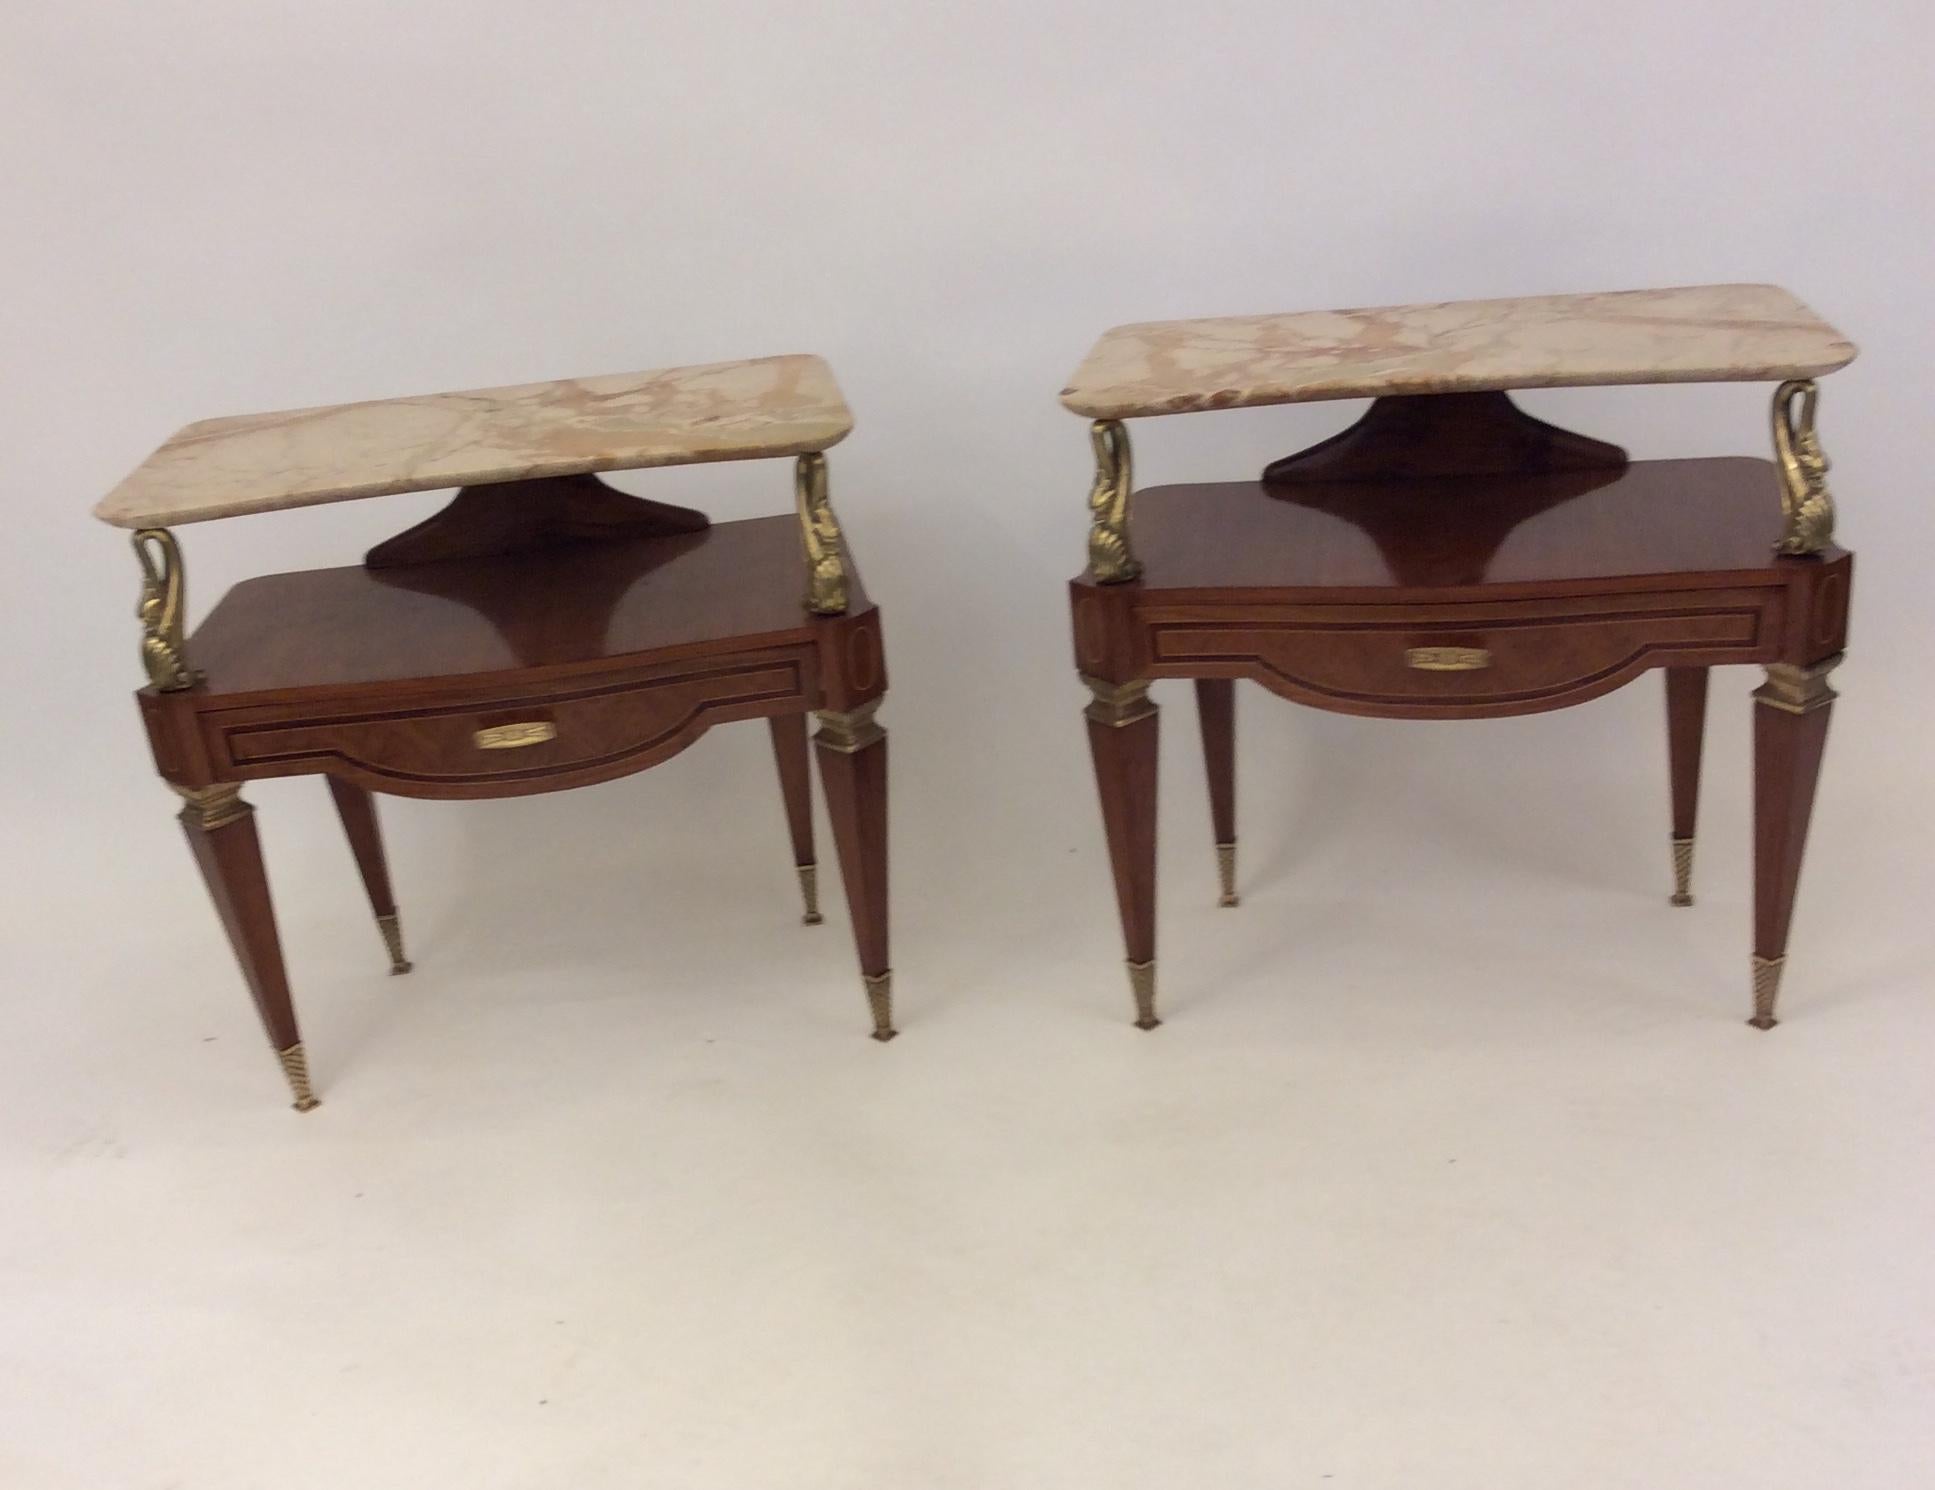 An amazing pair of Italian side tables or nightstands. A mix of woods, tapered legs leading to brass shoes. Decorative brass swans supporting a beautiful marble shelf. Each table has a drawer with brass hardware. 
Attributed to Gio Ponti, circa 1940.